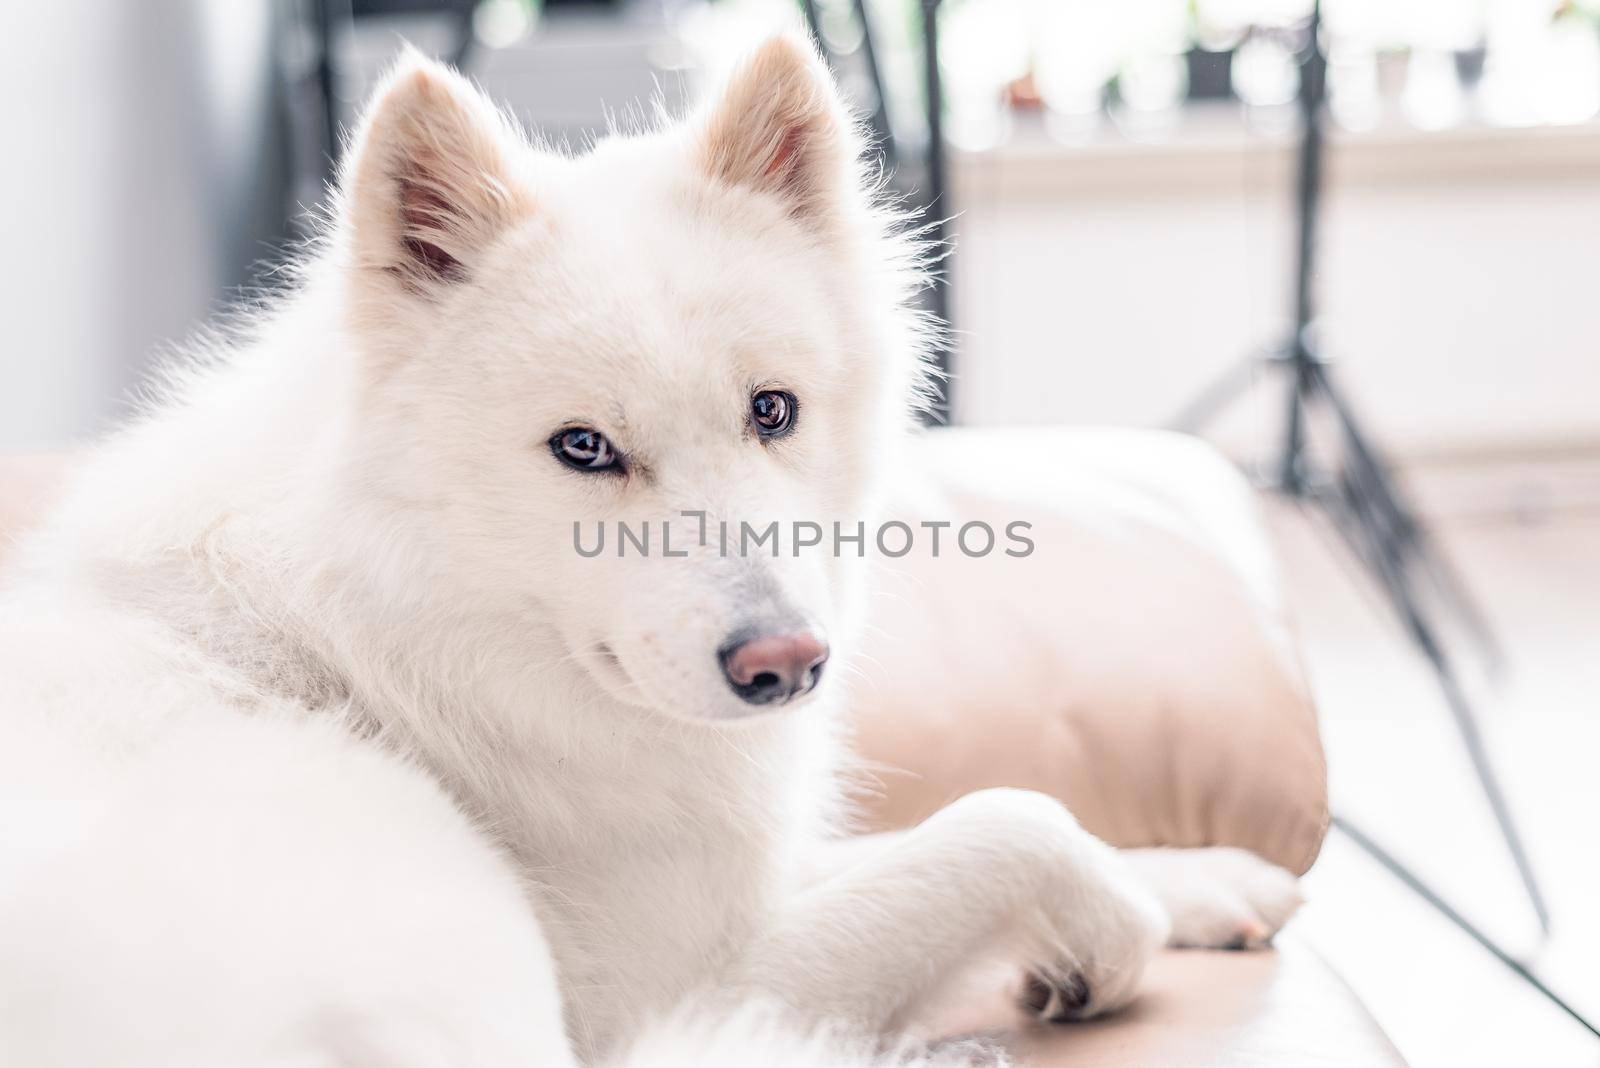 Indoor studio portrait of fluffy white purebred Samoyed pet dog with copy space.